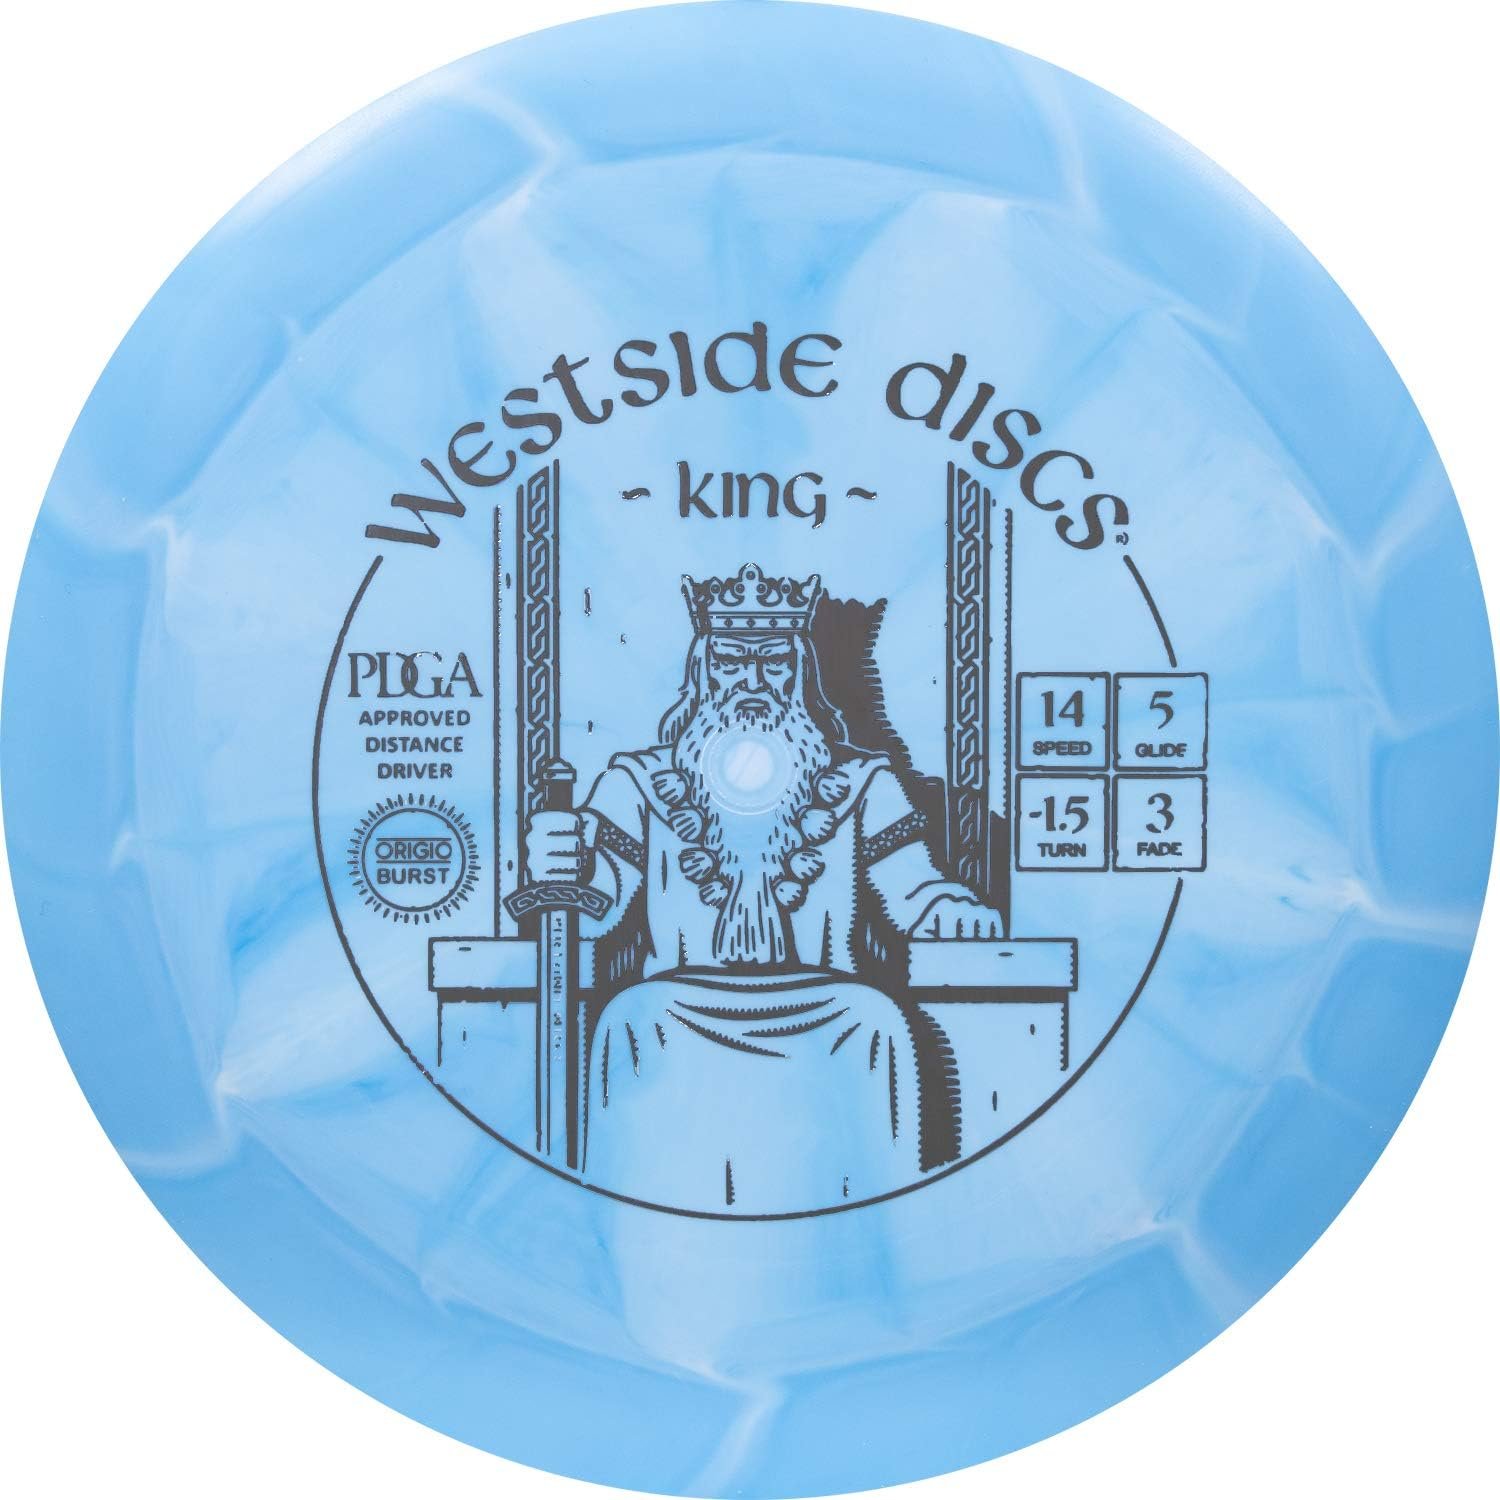 Westside Discs Origio Burst King Disc Golf Driver | Maximum Distance Frisbee Golf Driver | Easy Distance for Beginners | 170g Plus | Stamp Color and Burst Pattern Will Vary